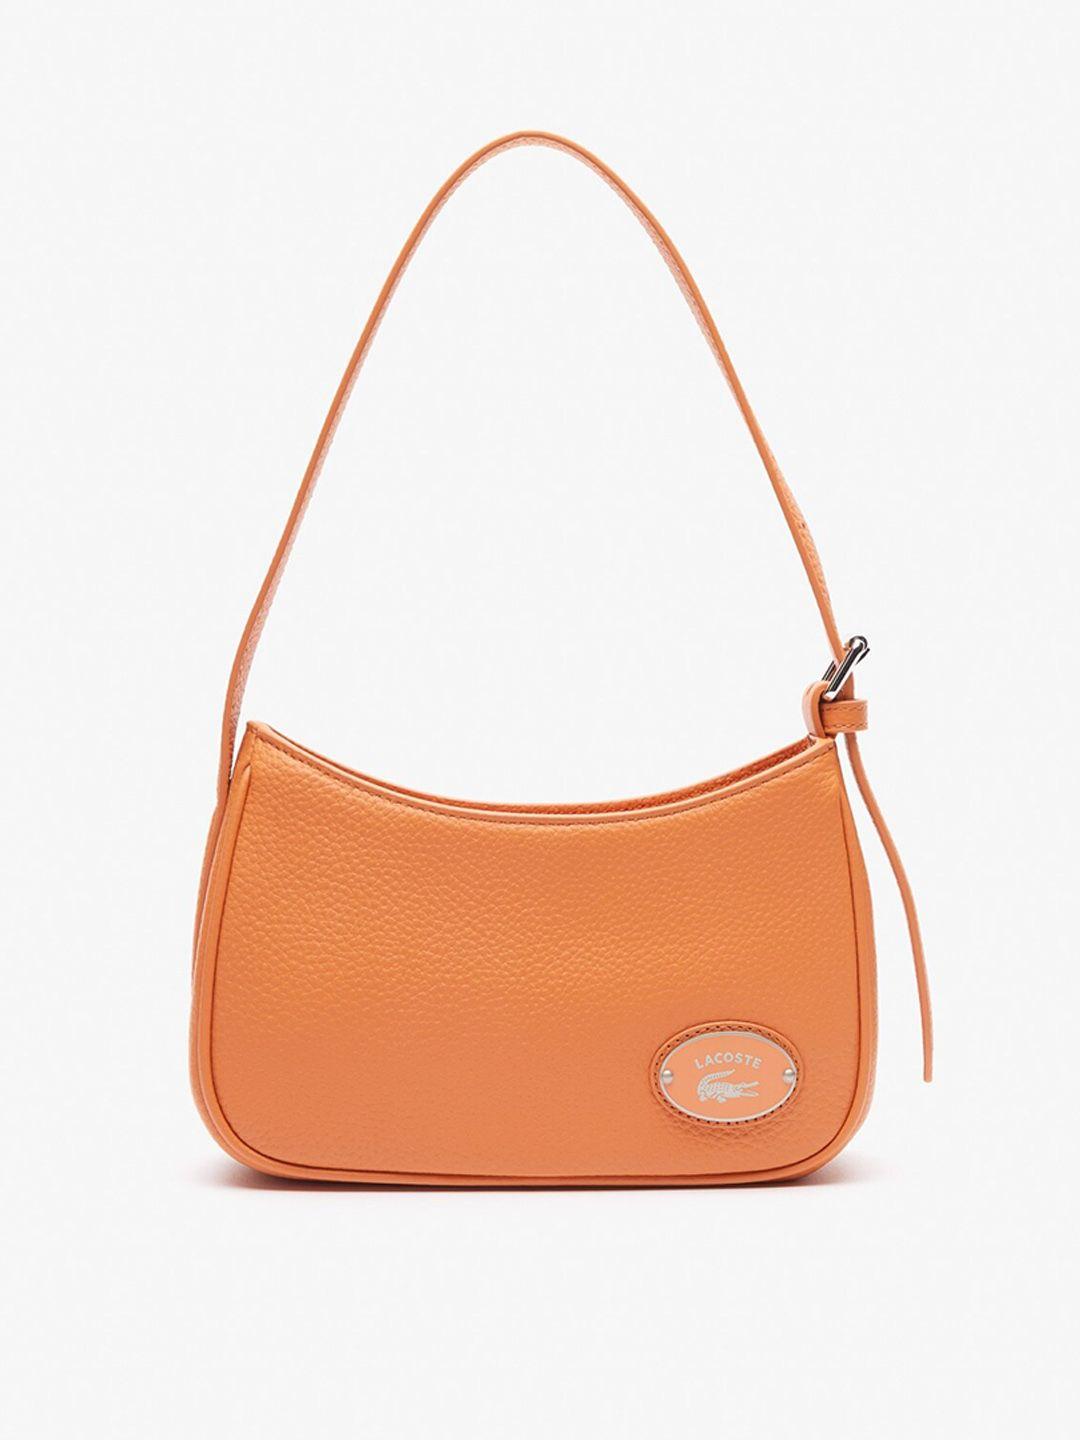 lacoste-pure-leather-structured-shoulder-bag